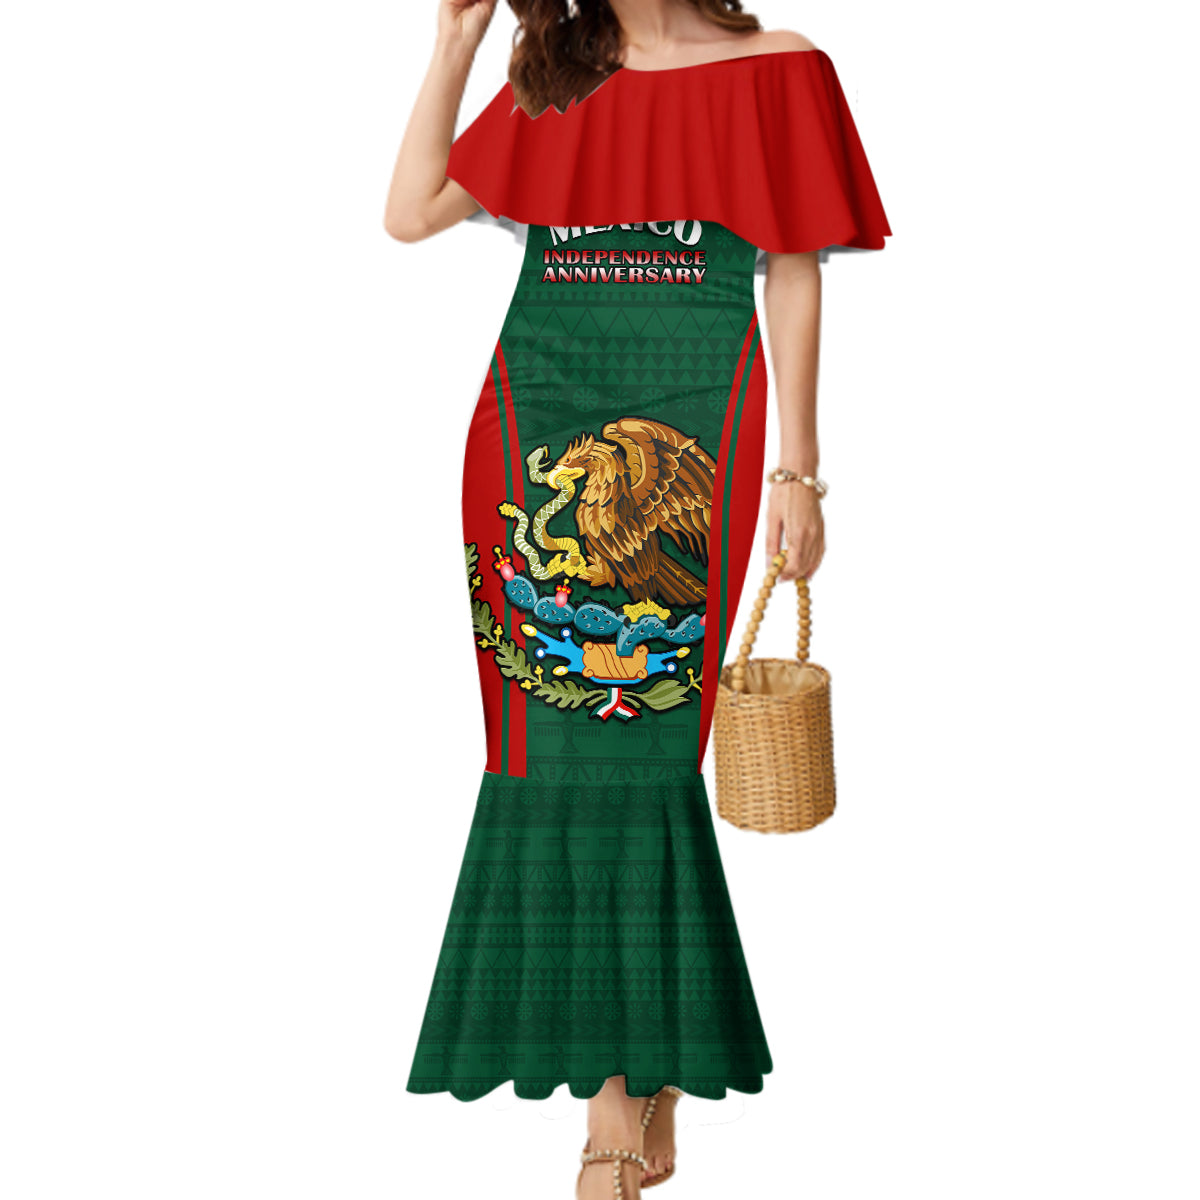 custom-mexico-independence-day-mermaid-dress-happy-213th-anniversary-mexican-proud